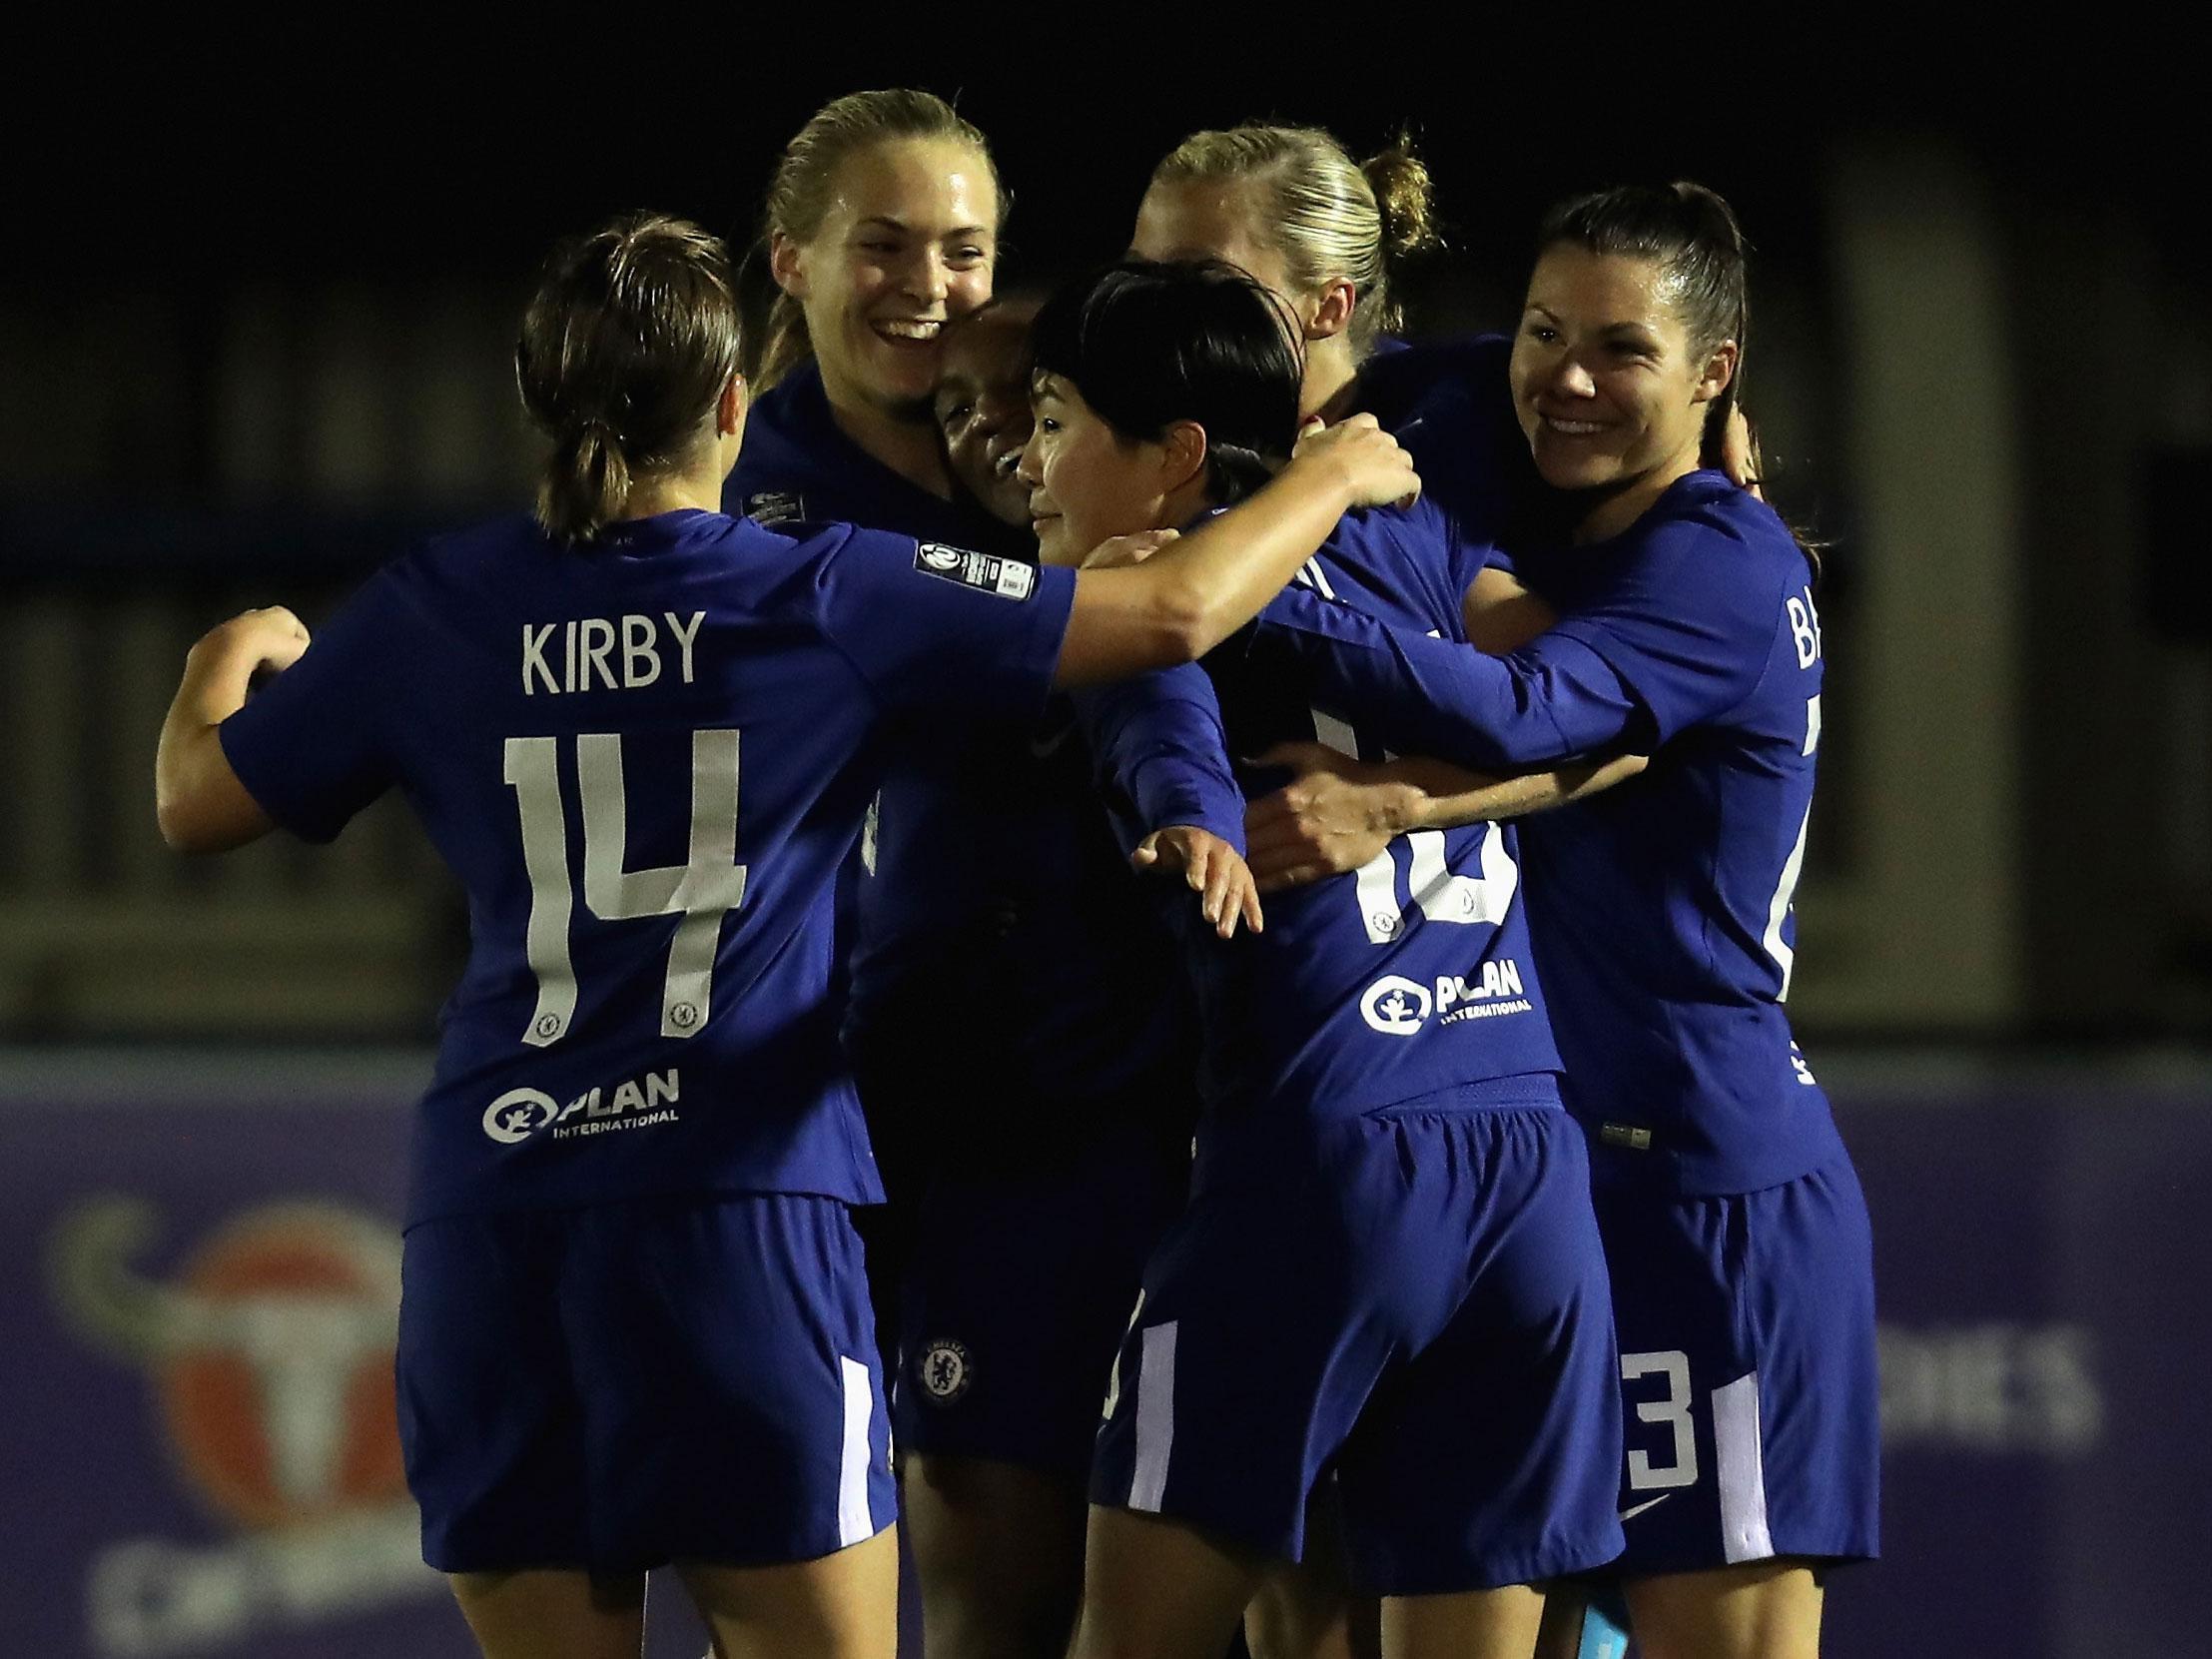 Chelsea Ladies put one foot in Champions League semi-finals after dominant first-leg win over Rosengard